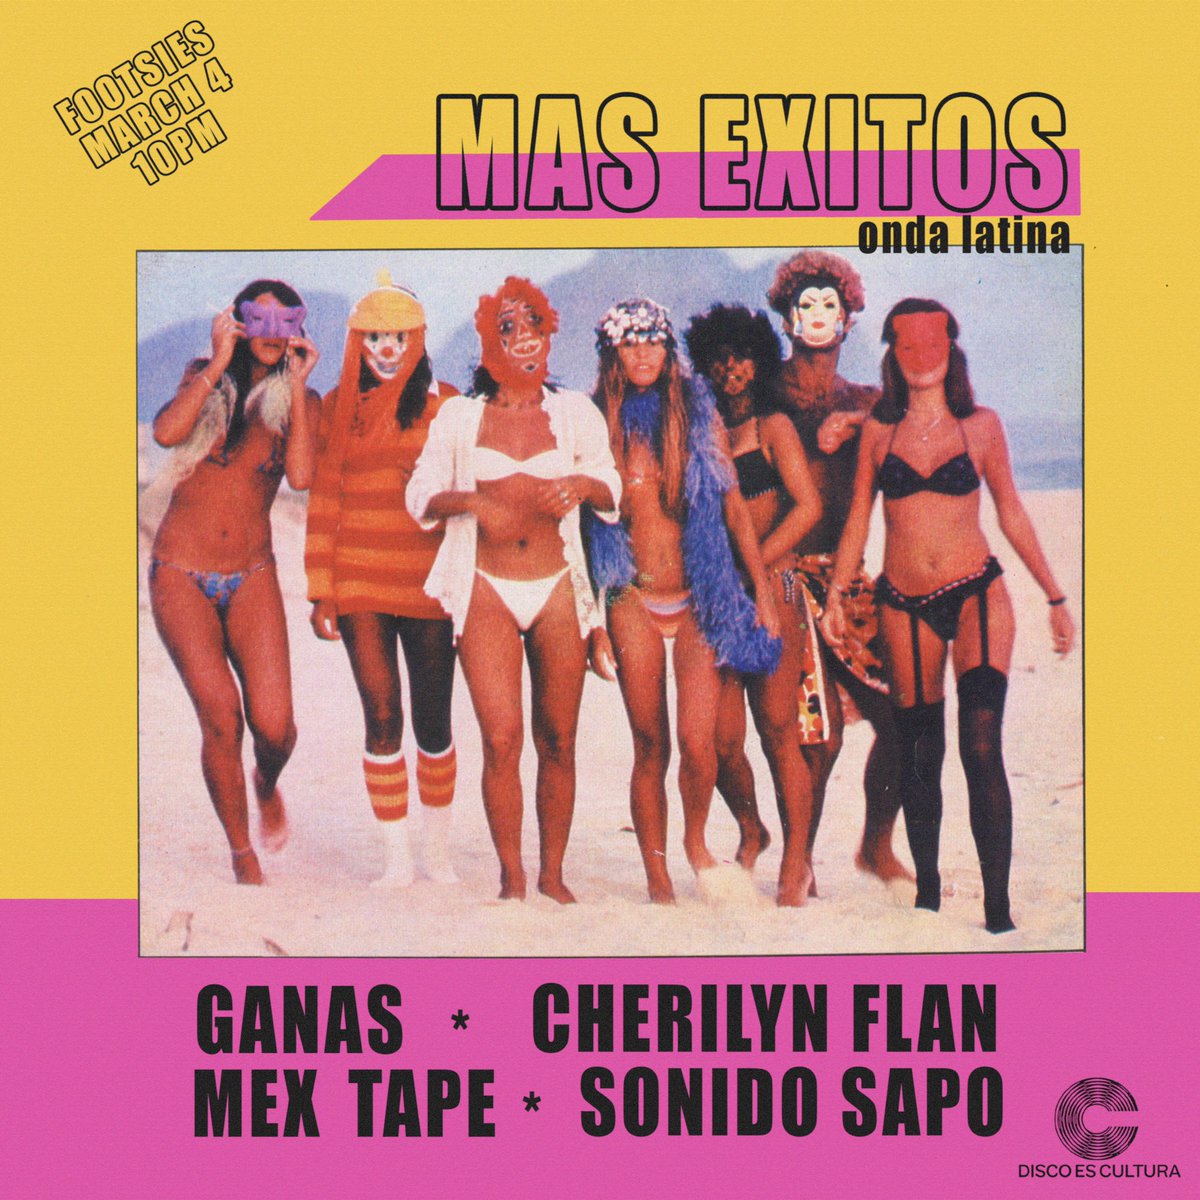 Tomorrow is Más Éxitos with special guest @mextape of @kumbia_net . Resident dj’s @cherilynflan @dogtoad aka Sonido Sapo and @og_ganas will also be throwing down discos calientes. Saturday March 4th @footsiesbar 10-2 no cover 21+ #eldiscoescultura #masexitos